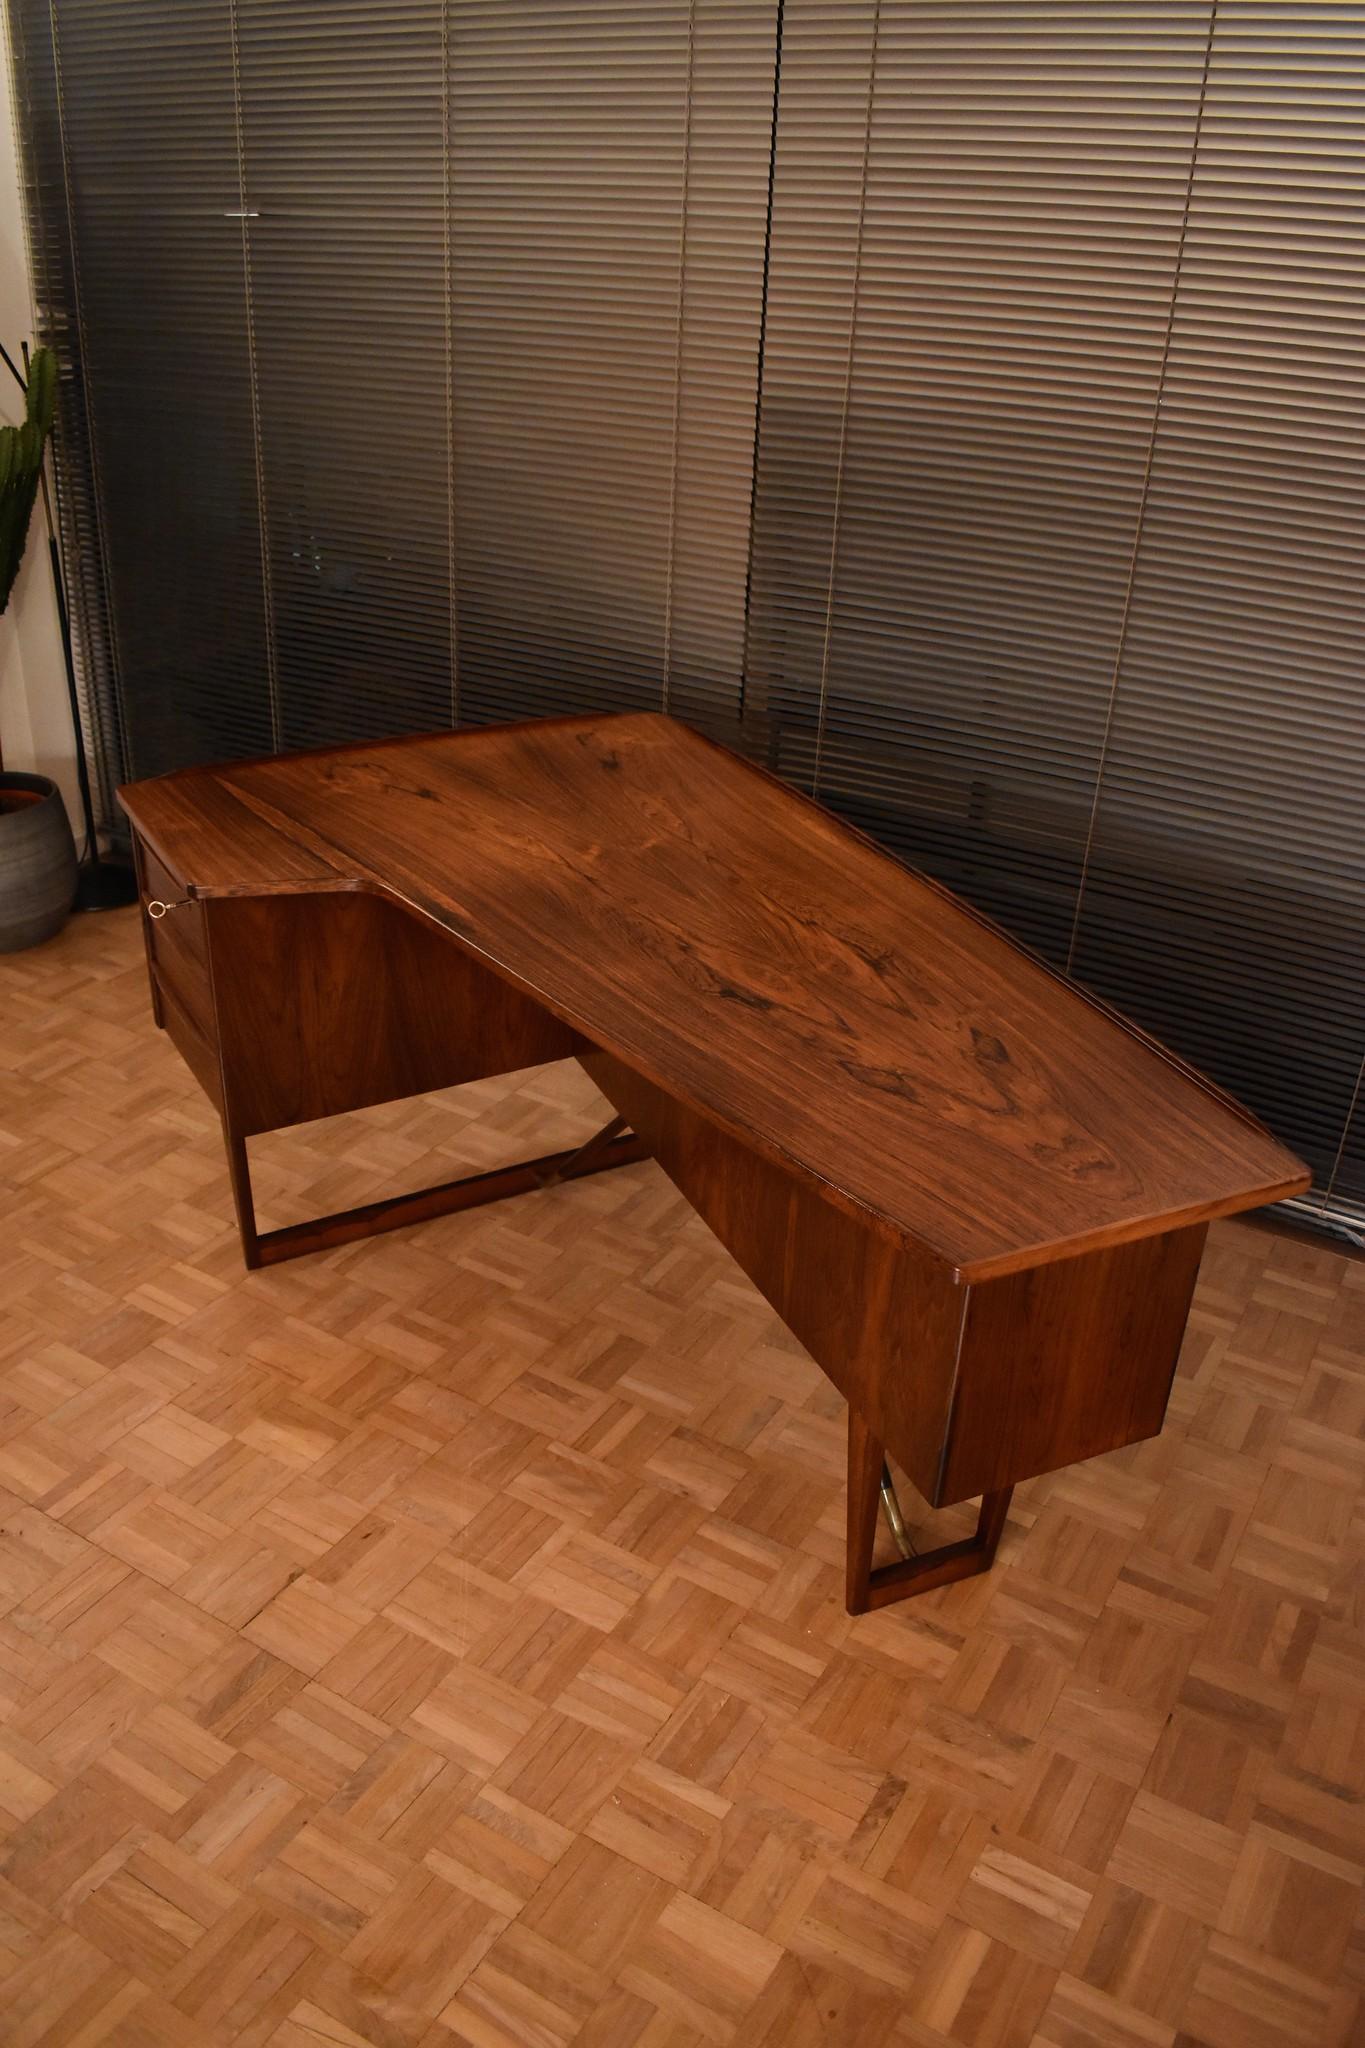 An outstanding asymmetrical desk designed by Peter Lovig Nielsen for Hedensted Mobelfabrik, Denmark.

One of the most handsome desks you can find. This example executed in lush Brazilian rosewood exhibiting wonderful character to the grain.

A